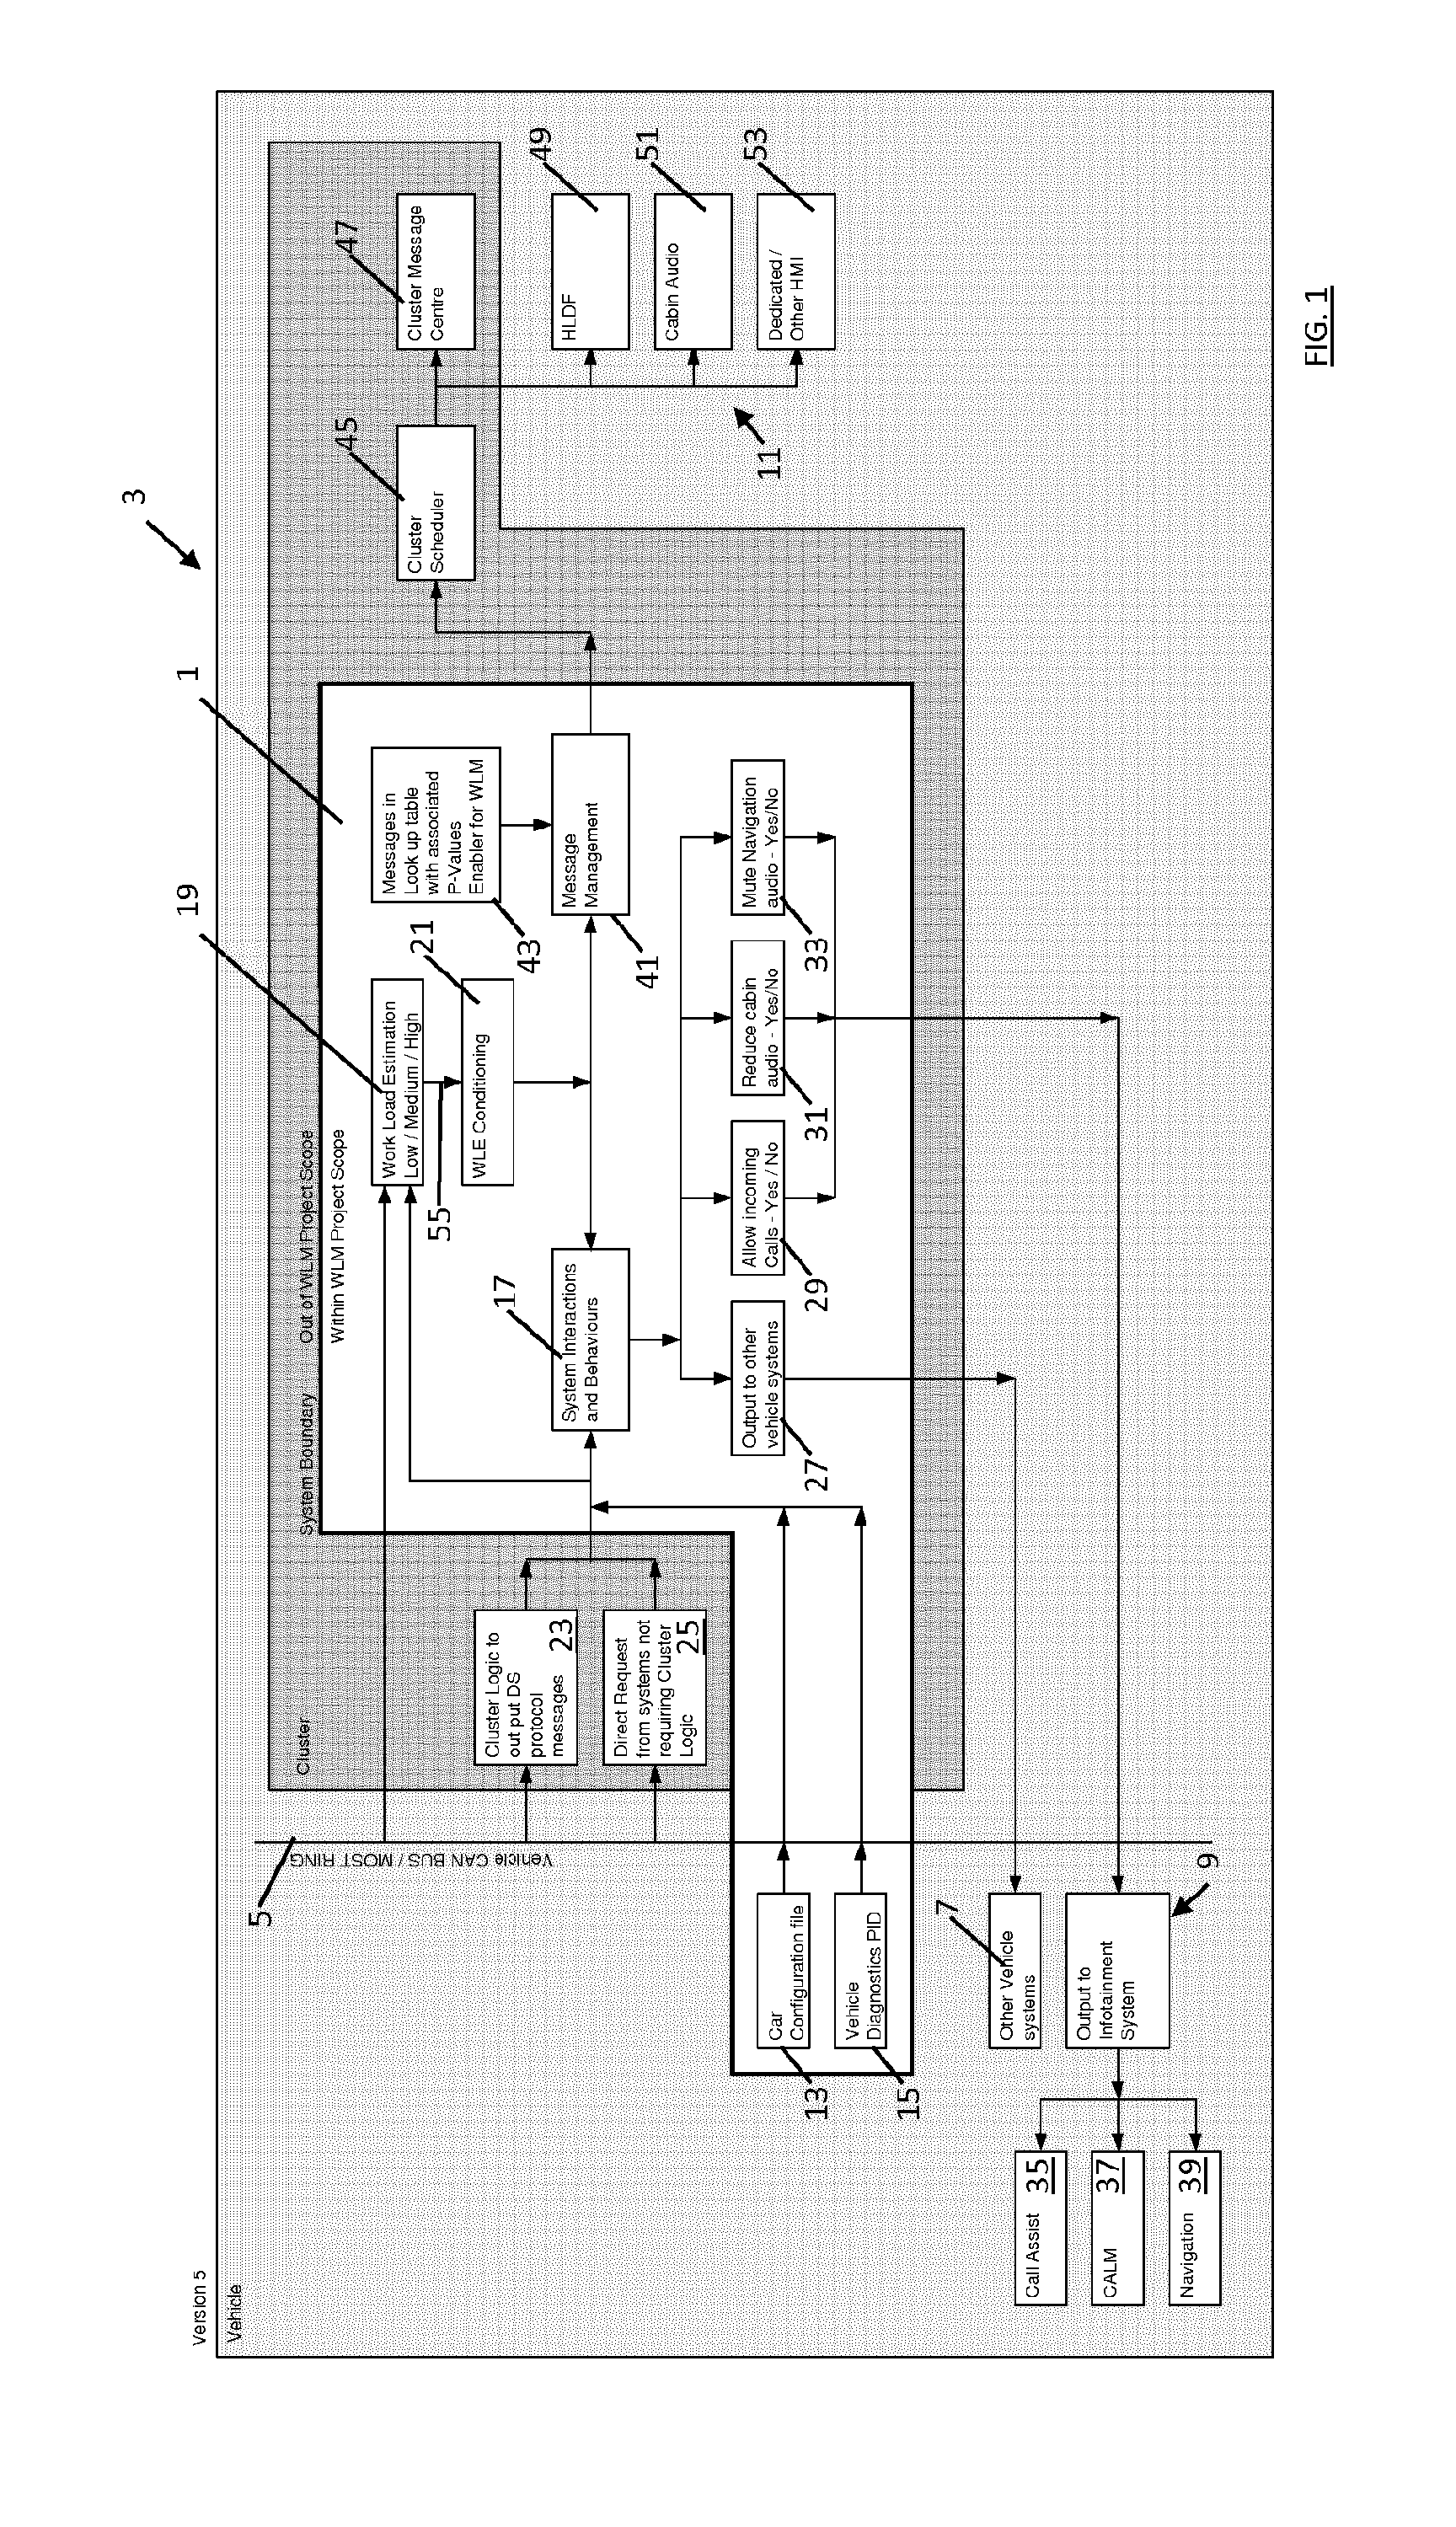 Control System and Method